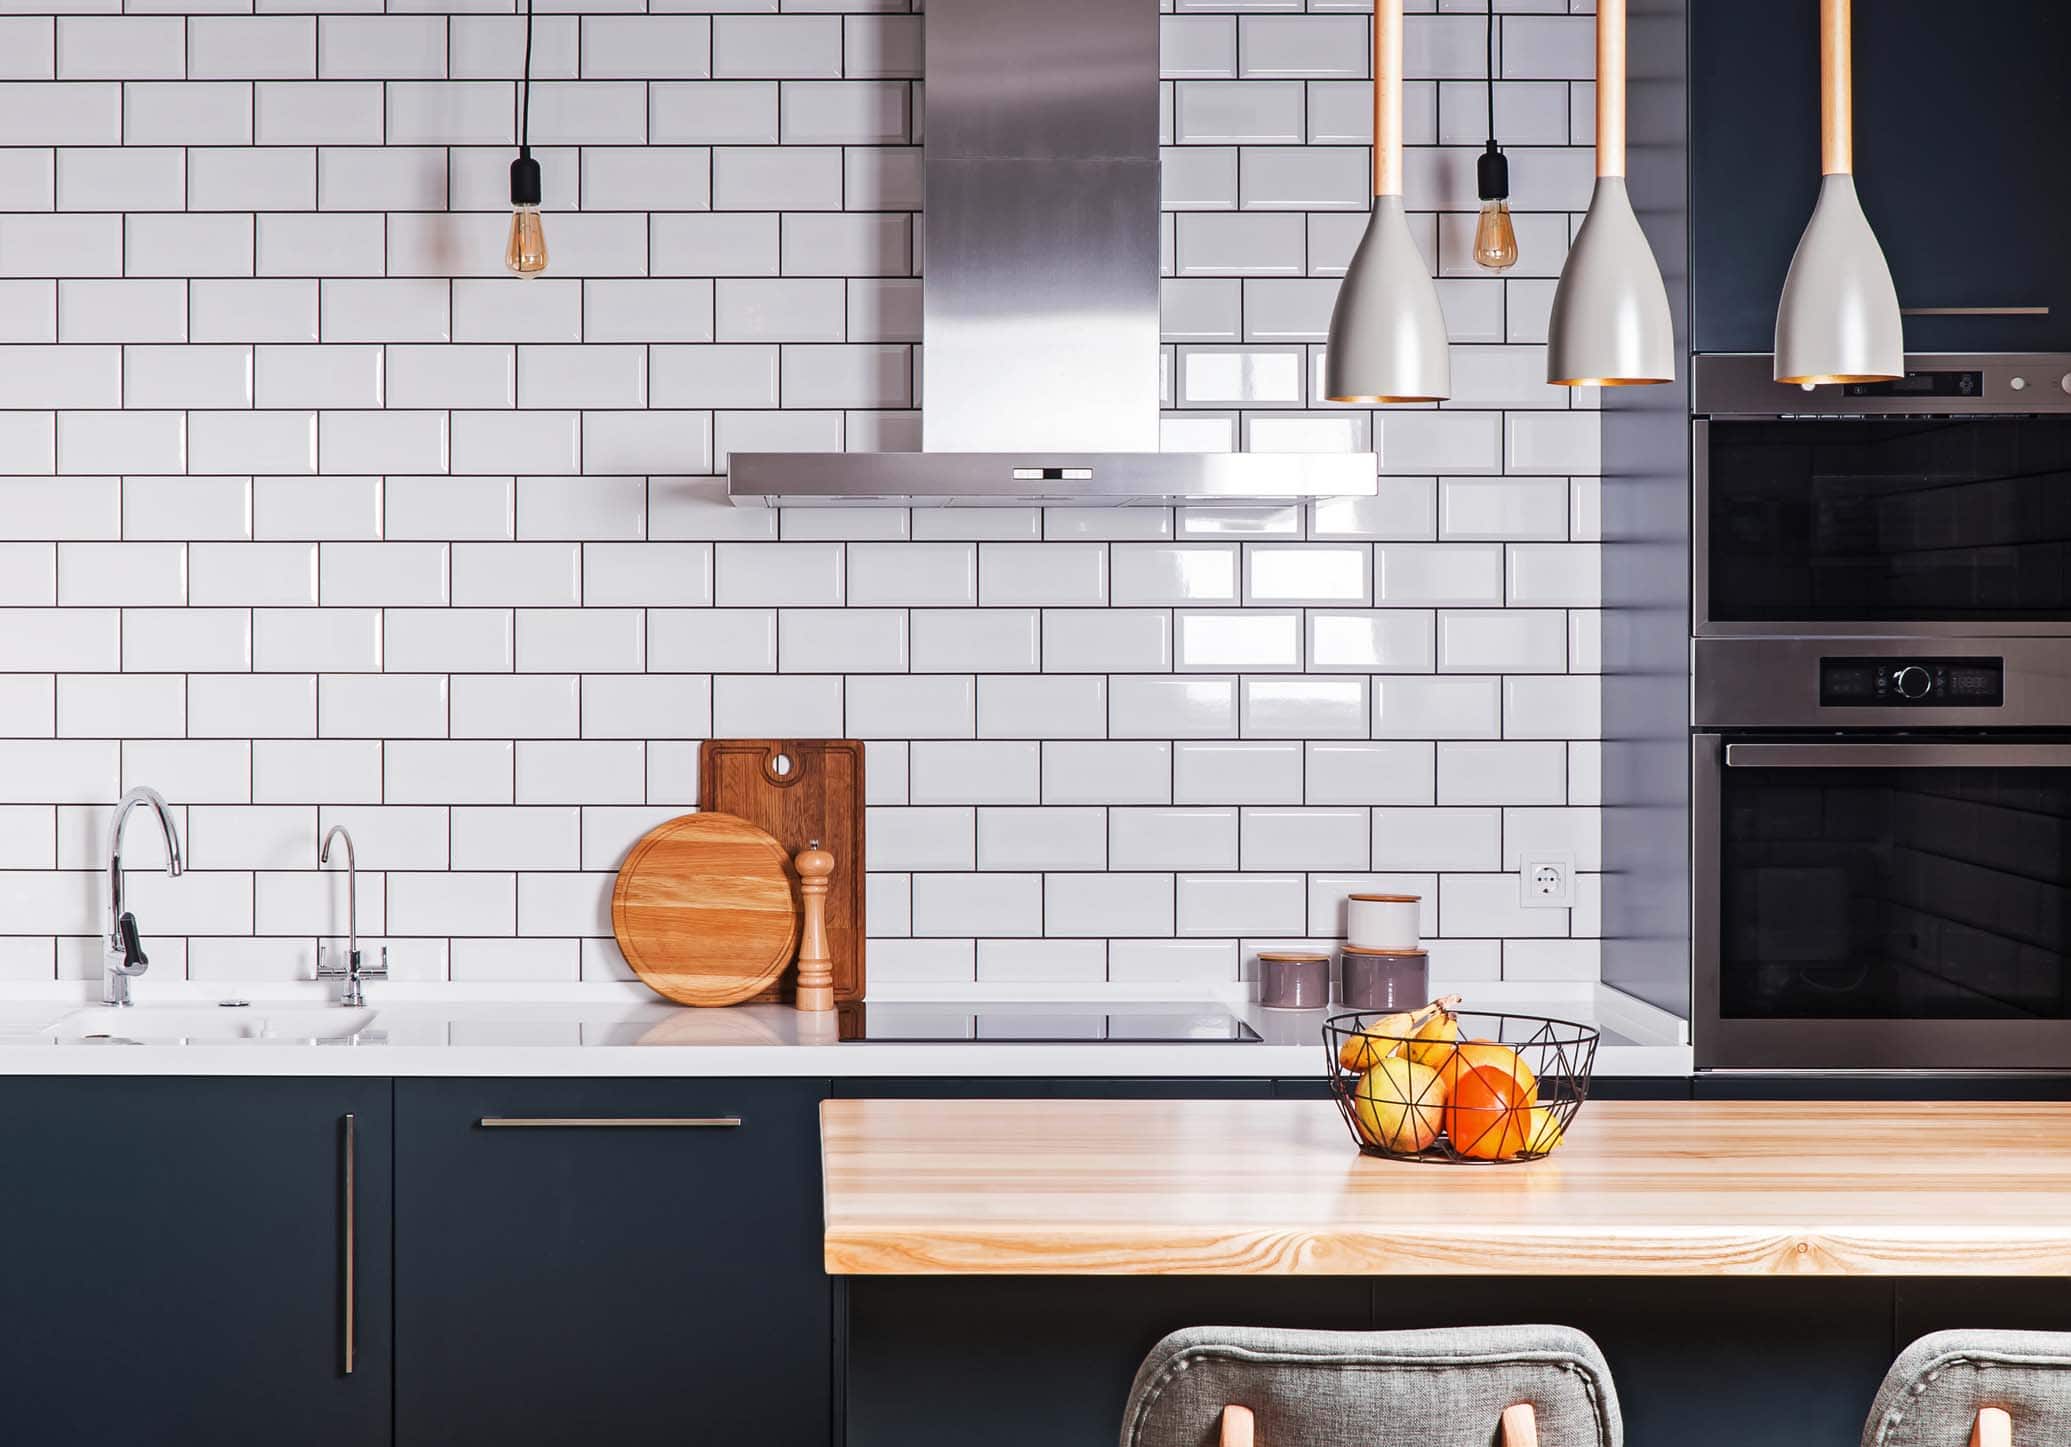 Black and white subway tile and grout